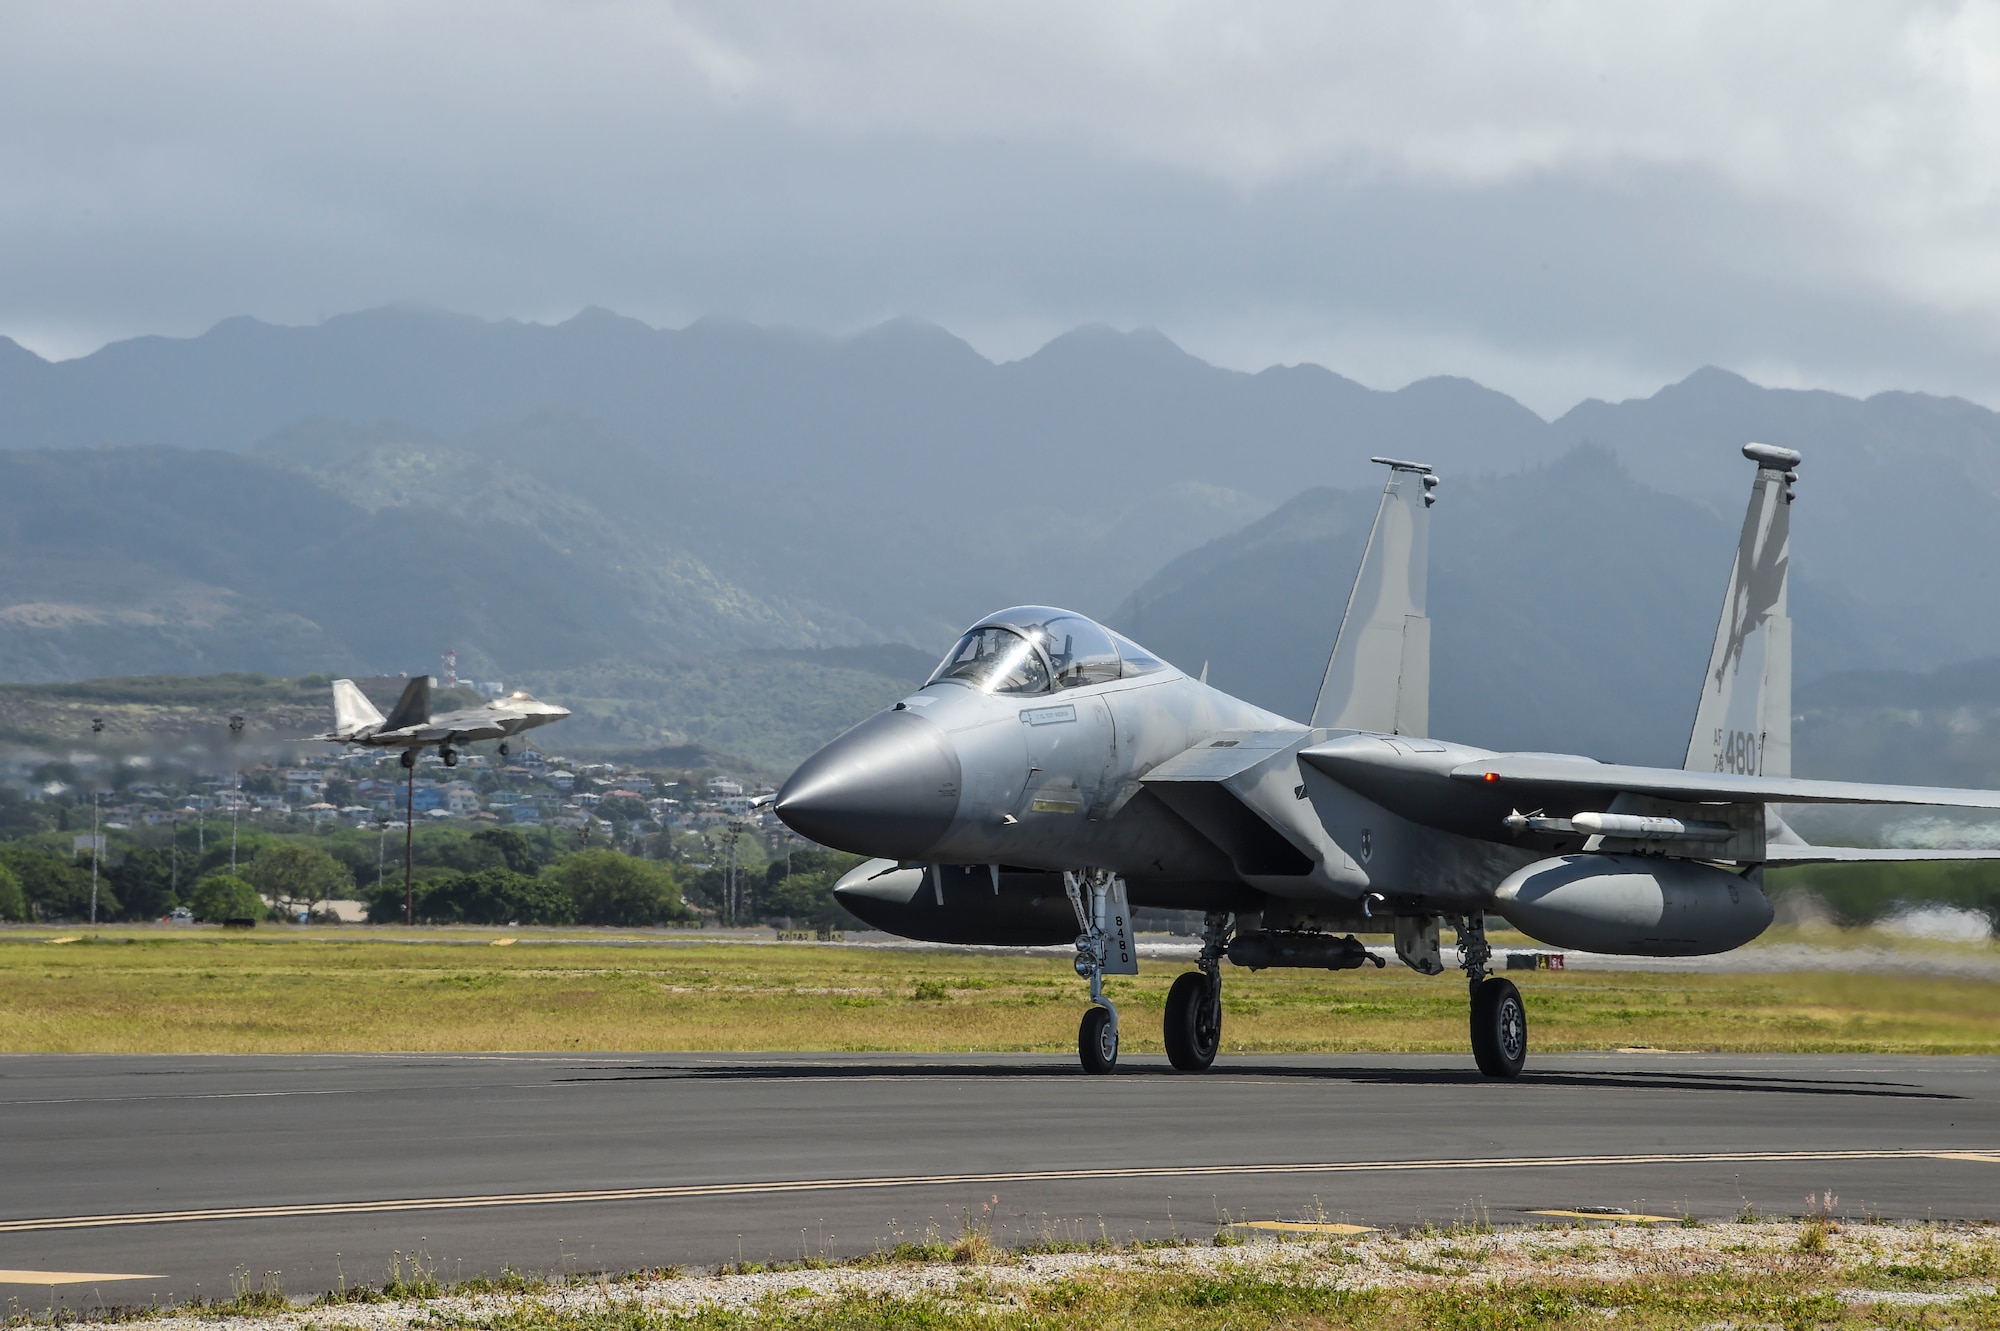 A U.S. Air Force F-15 Eagle from the California Air National Guard’s 144th Fighter Wing and an F-22 Raptor from the 154th Wing’s Hawaii Air National Guard return to Joint Base Pearl Harbor-Hickam after the morning sortie at the Honolulu International Airport April 1, 2017 during Sentry Aloha 17-03. Sentry Aloha provides the ANG, Air Force and DoD counterparts a multi-faceted, joint venue with supporting infrastructure and personnel that incorporates current, realistic integrated training. (Air National Guard photo by Senior Master Sgt. Chris Drudge)